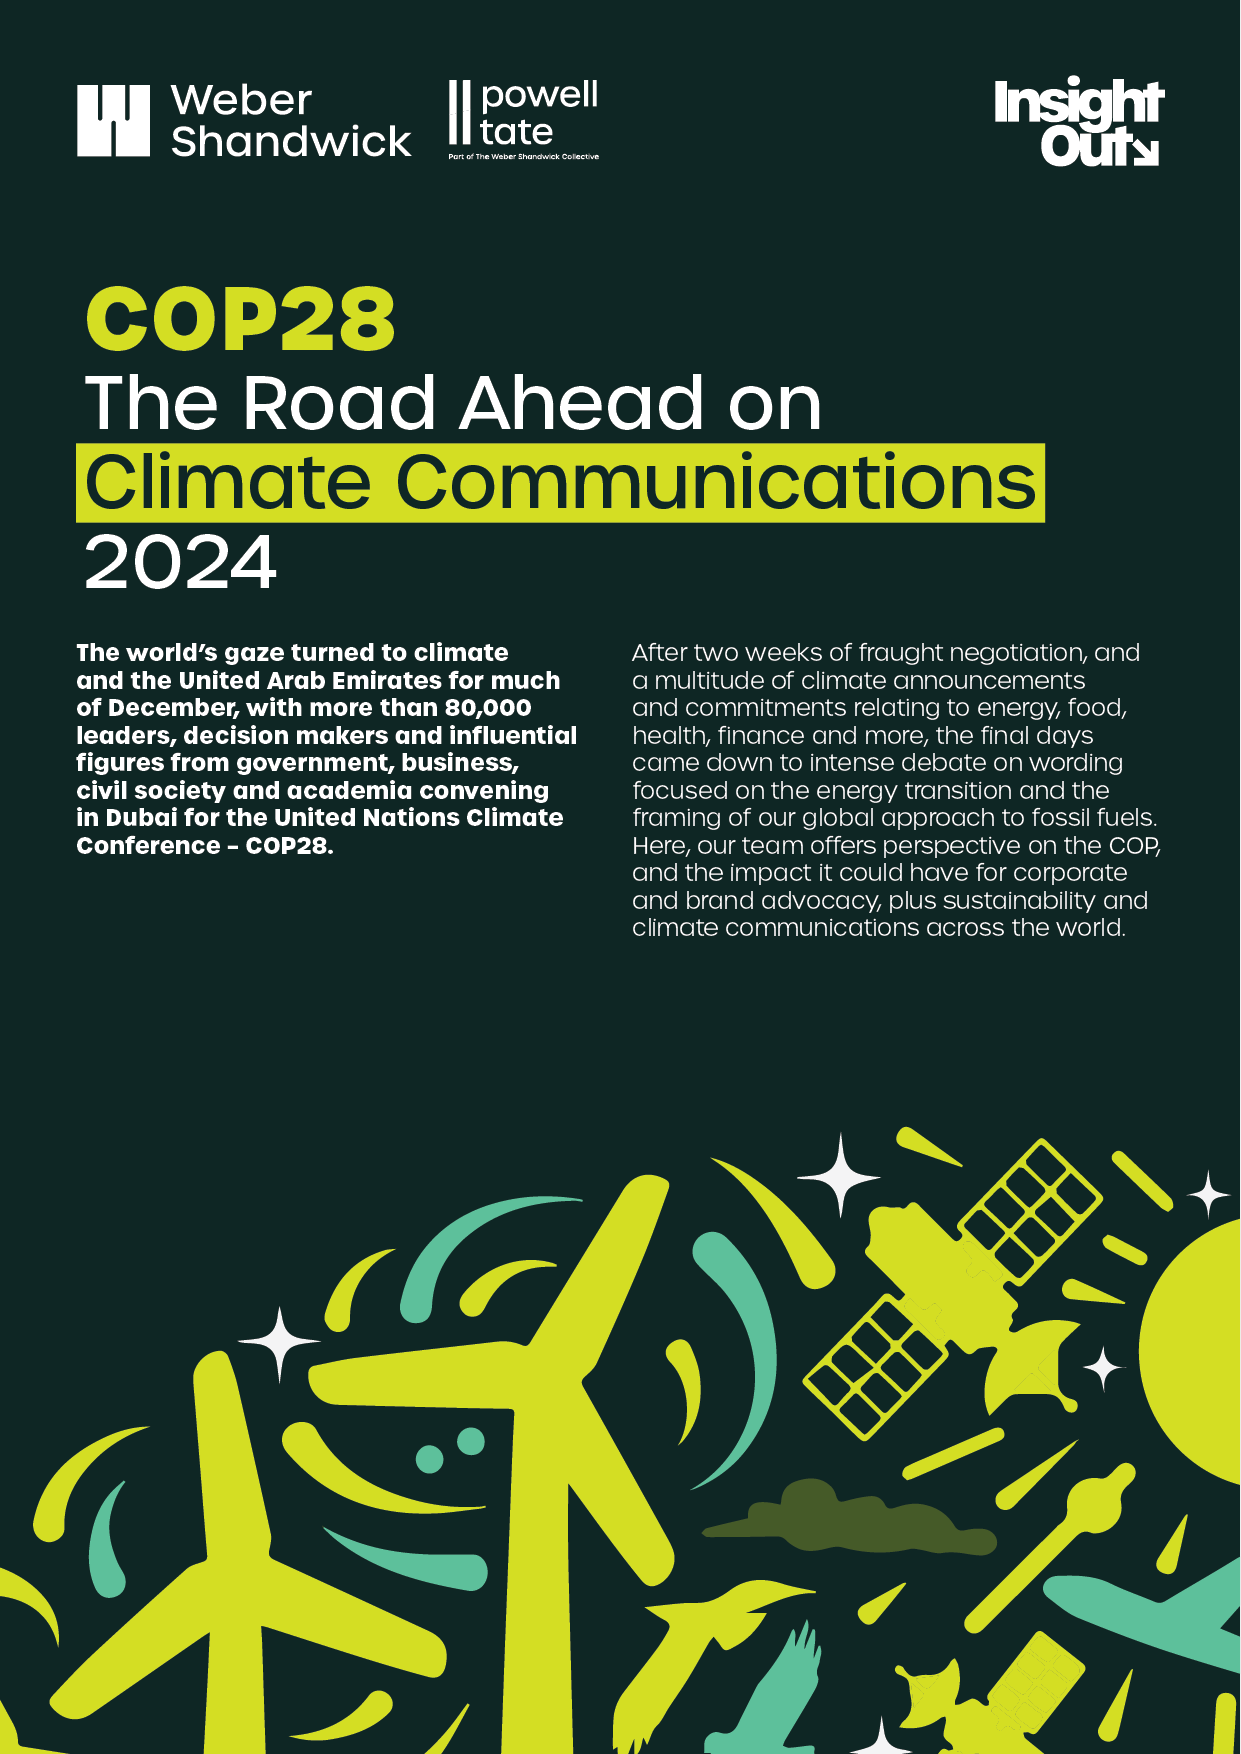 COP28 - The Road Ahead On Climate Communications_Page-1